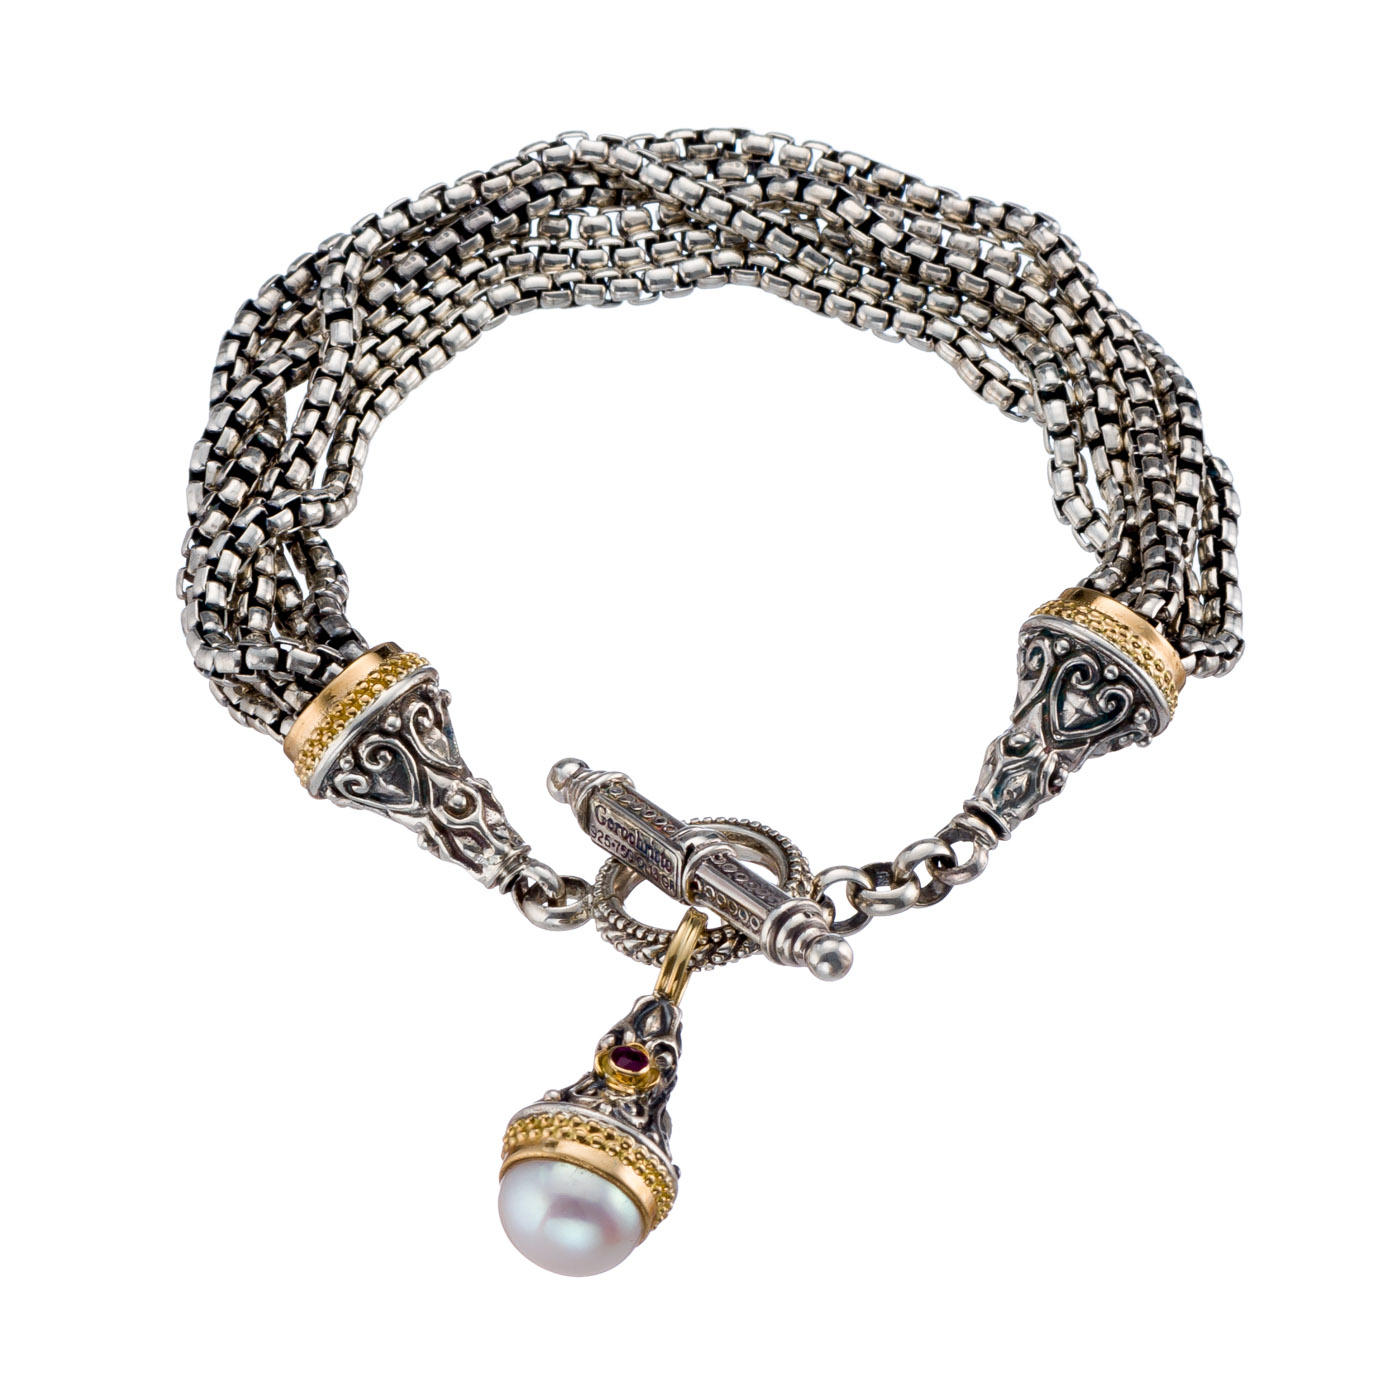 Santorini Bracelet link and Chain in 18K Gold and Sterling Silver with Charm